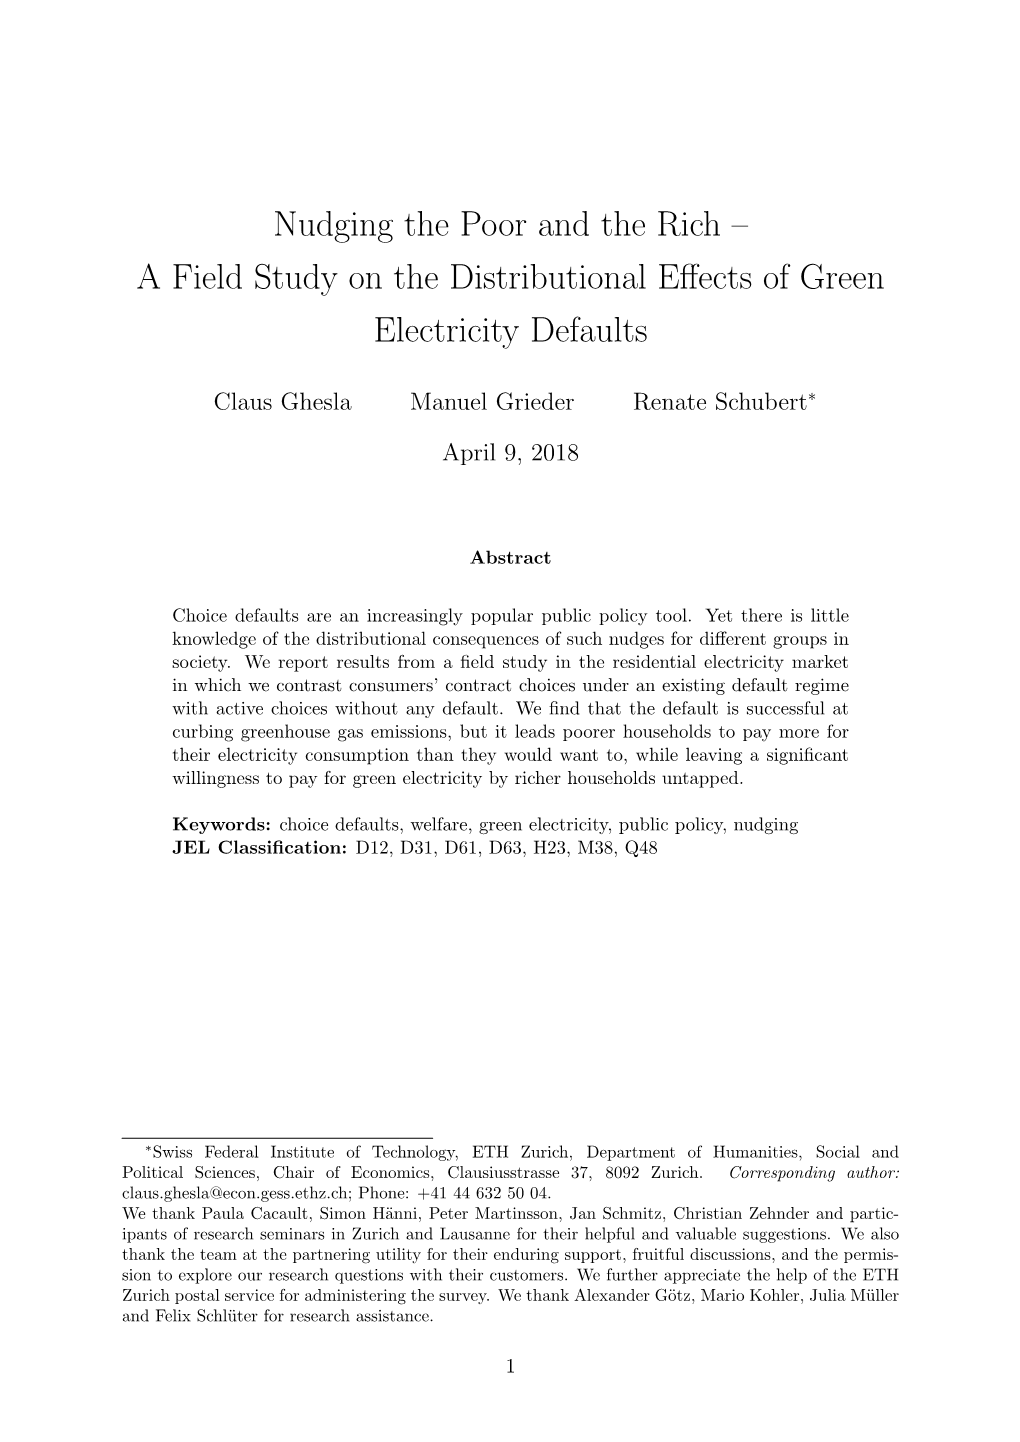 Nudging the Poor and the Rich – a Field Study on the Distributional Eﬀects of Green Electricity Defaults